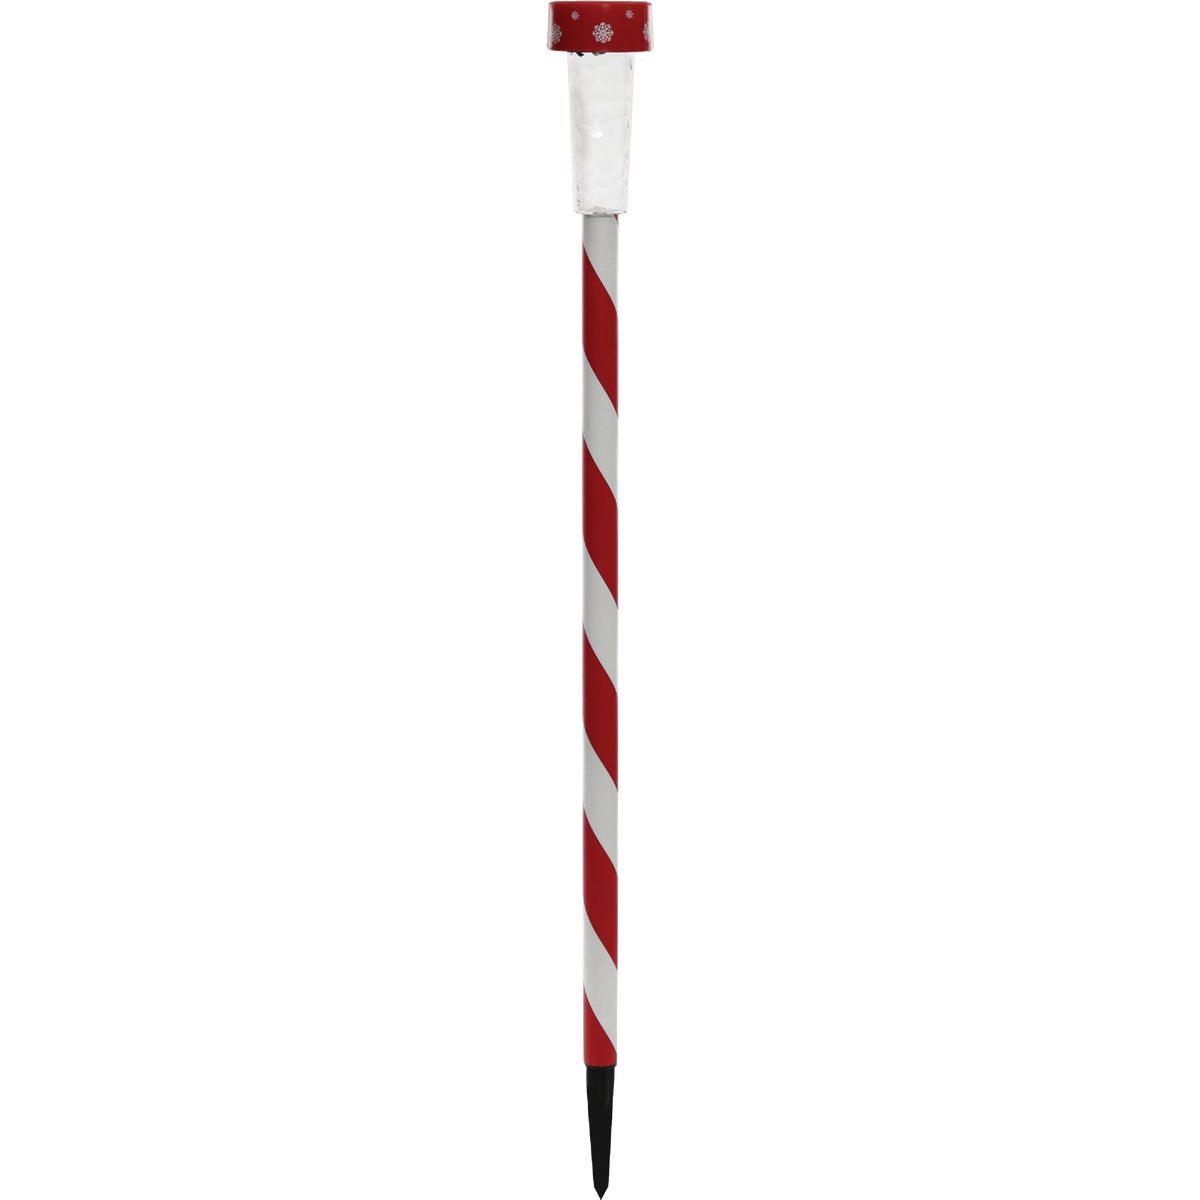 Item 900308, Solar red and white striped holiday pathway stake.